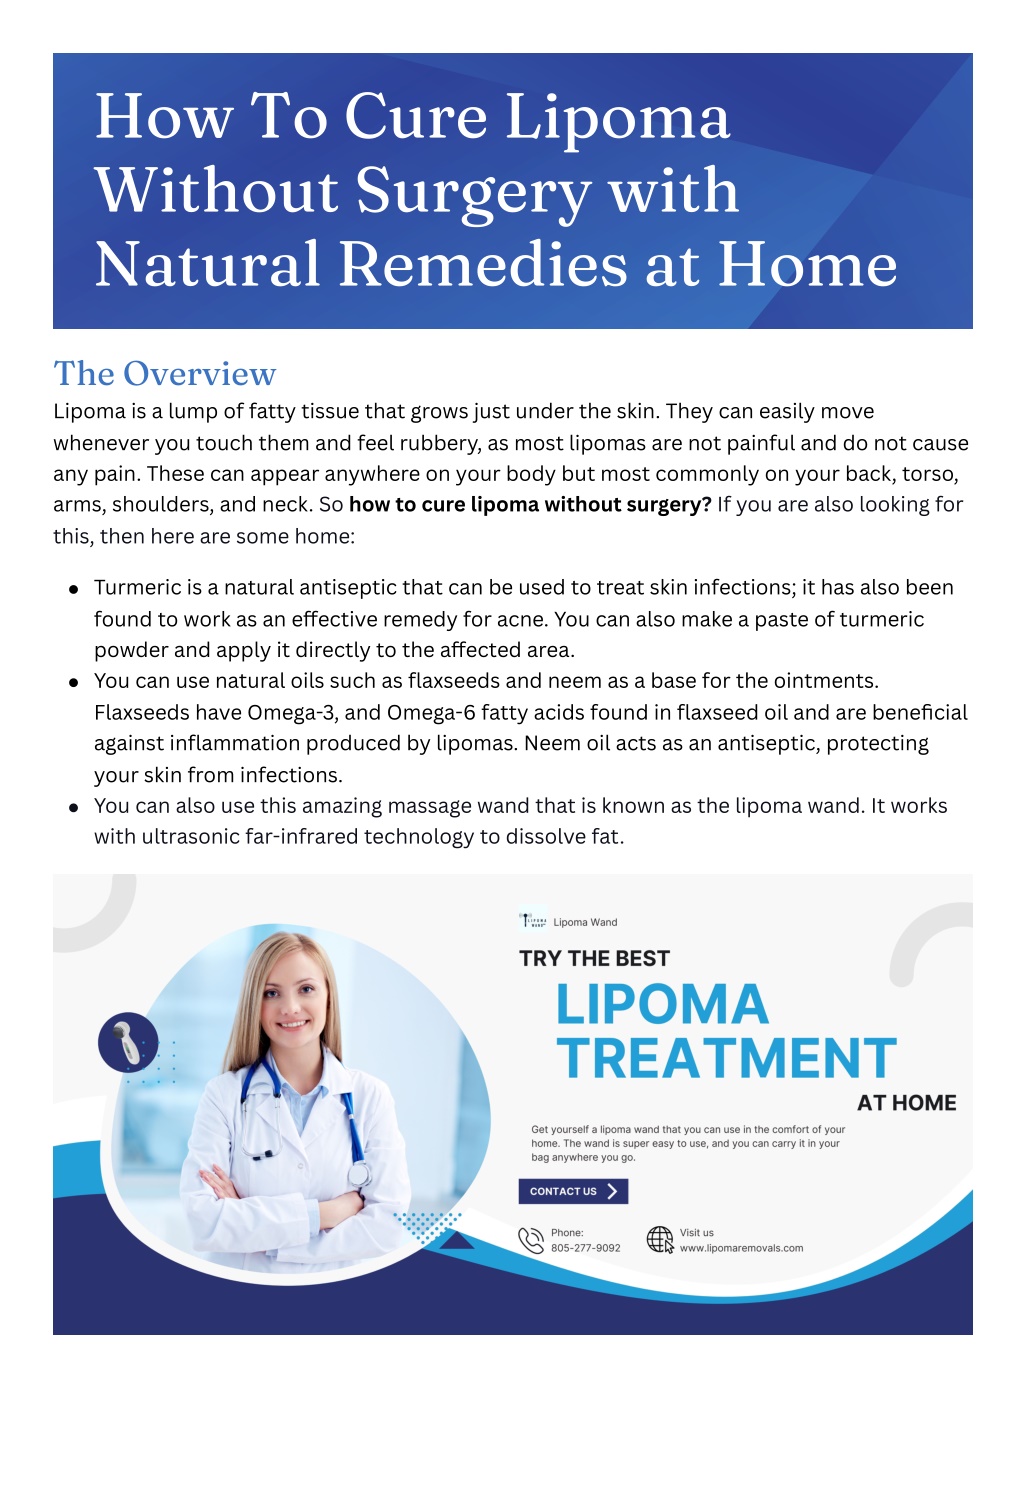 Ppt How To Cure Lipoma Without Surgery With Natural Remedies At Home Powerpoint Presentation 